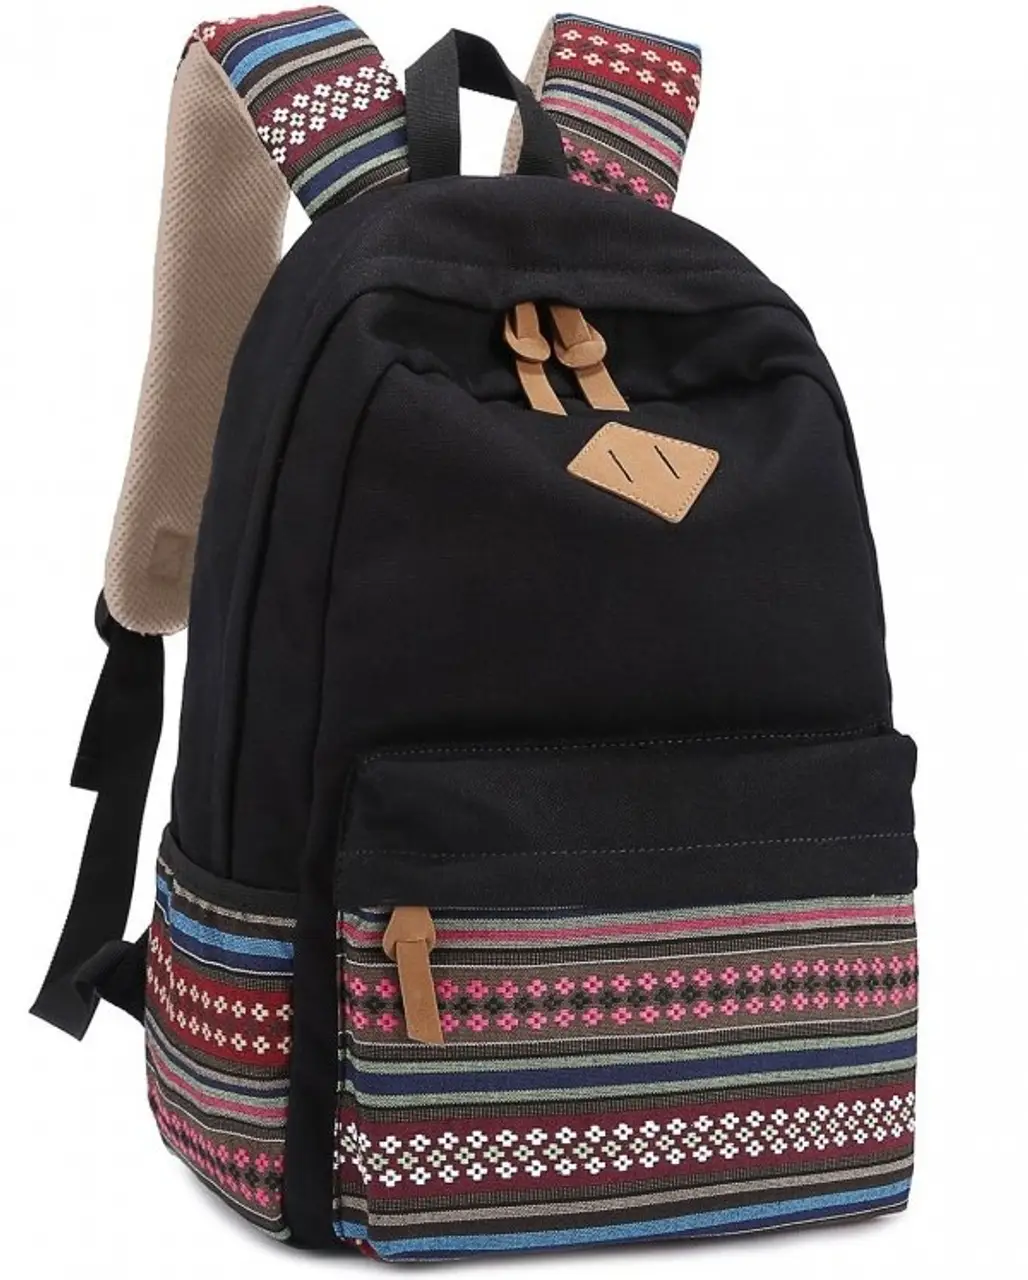 Leaper Causal Style Lightweight Canvas Laptop Bag